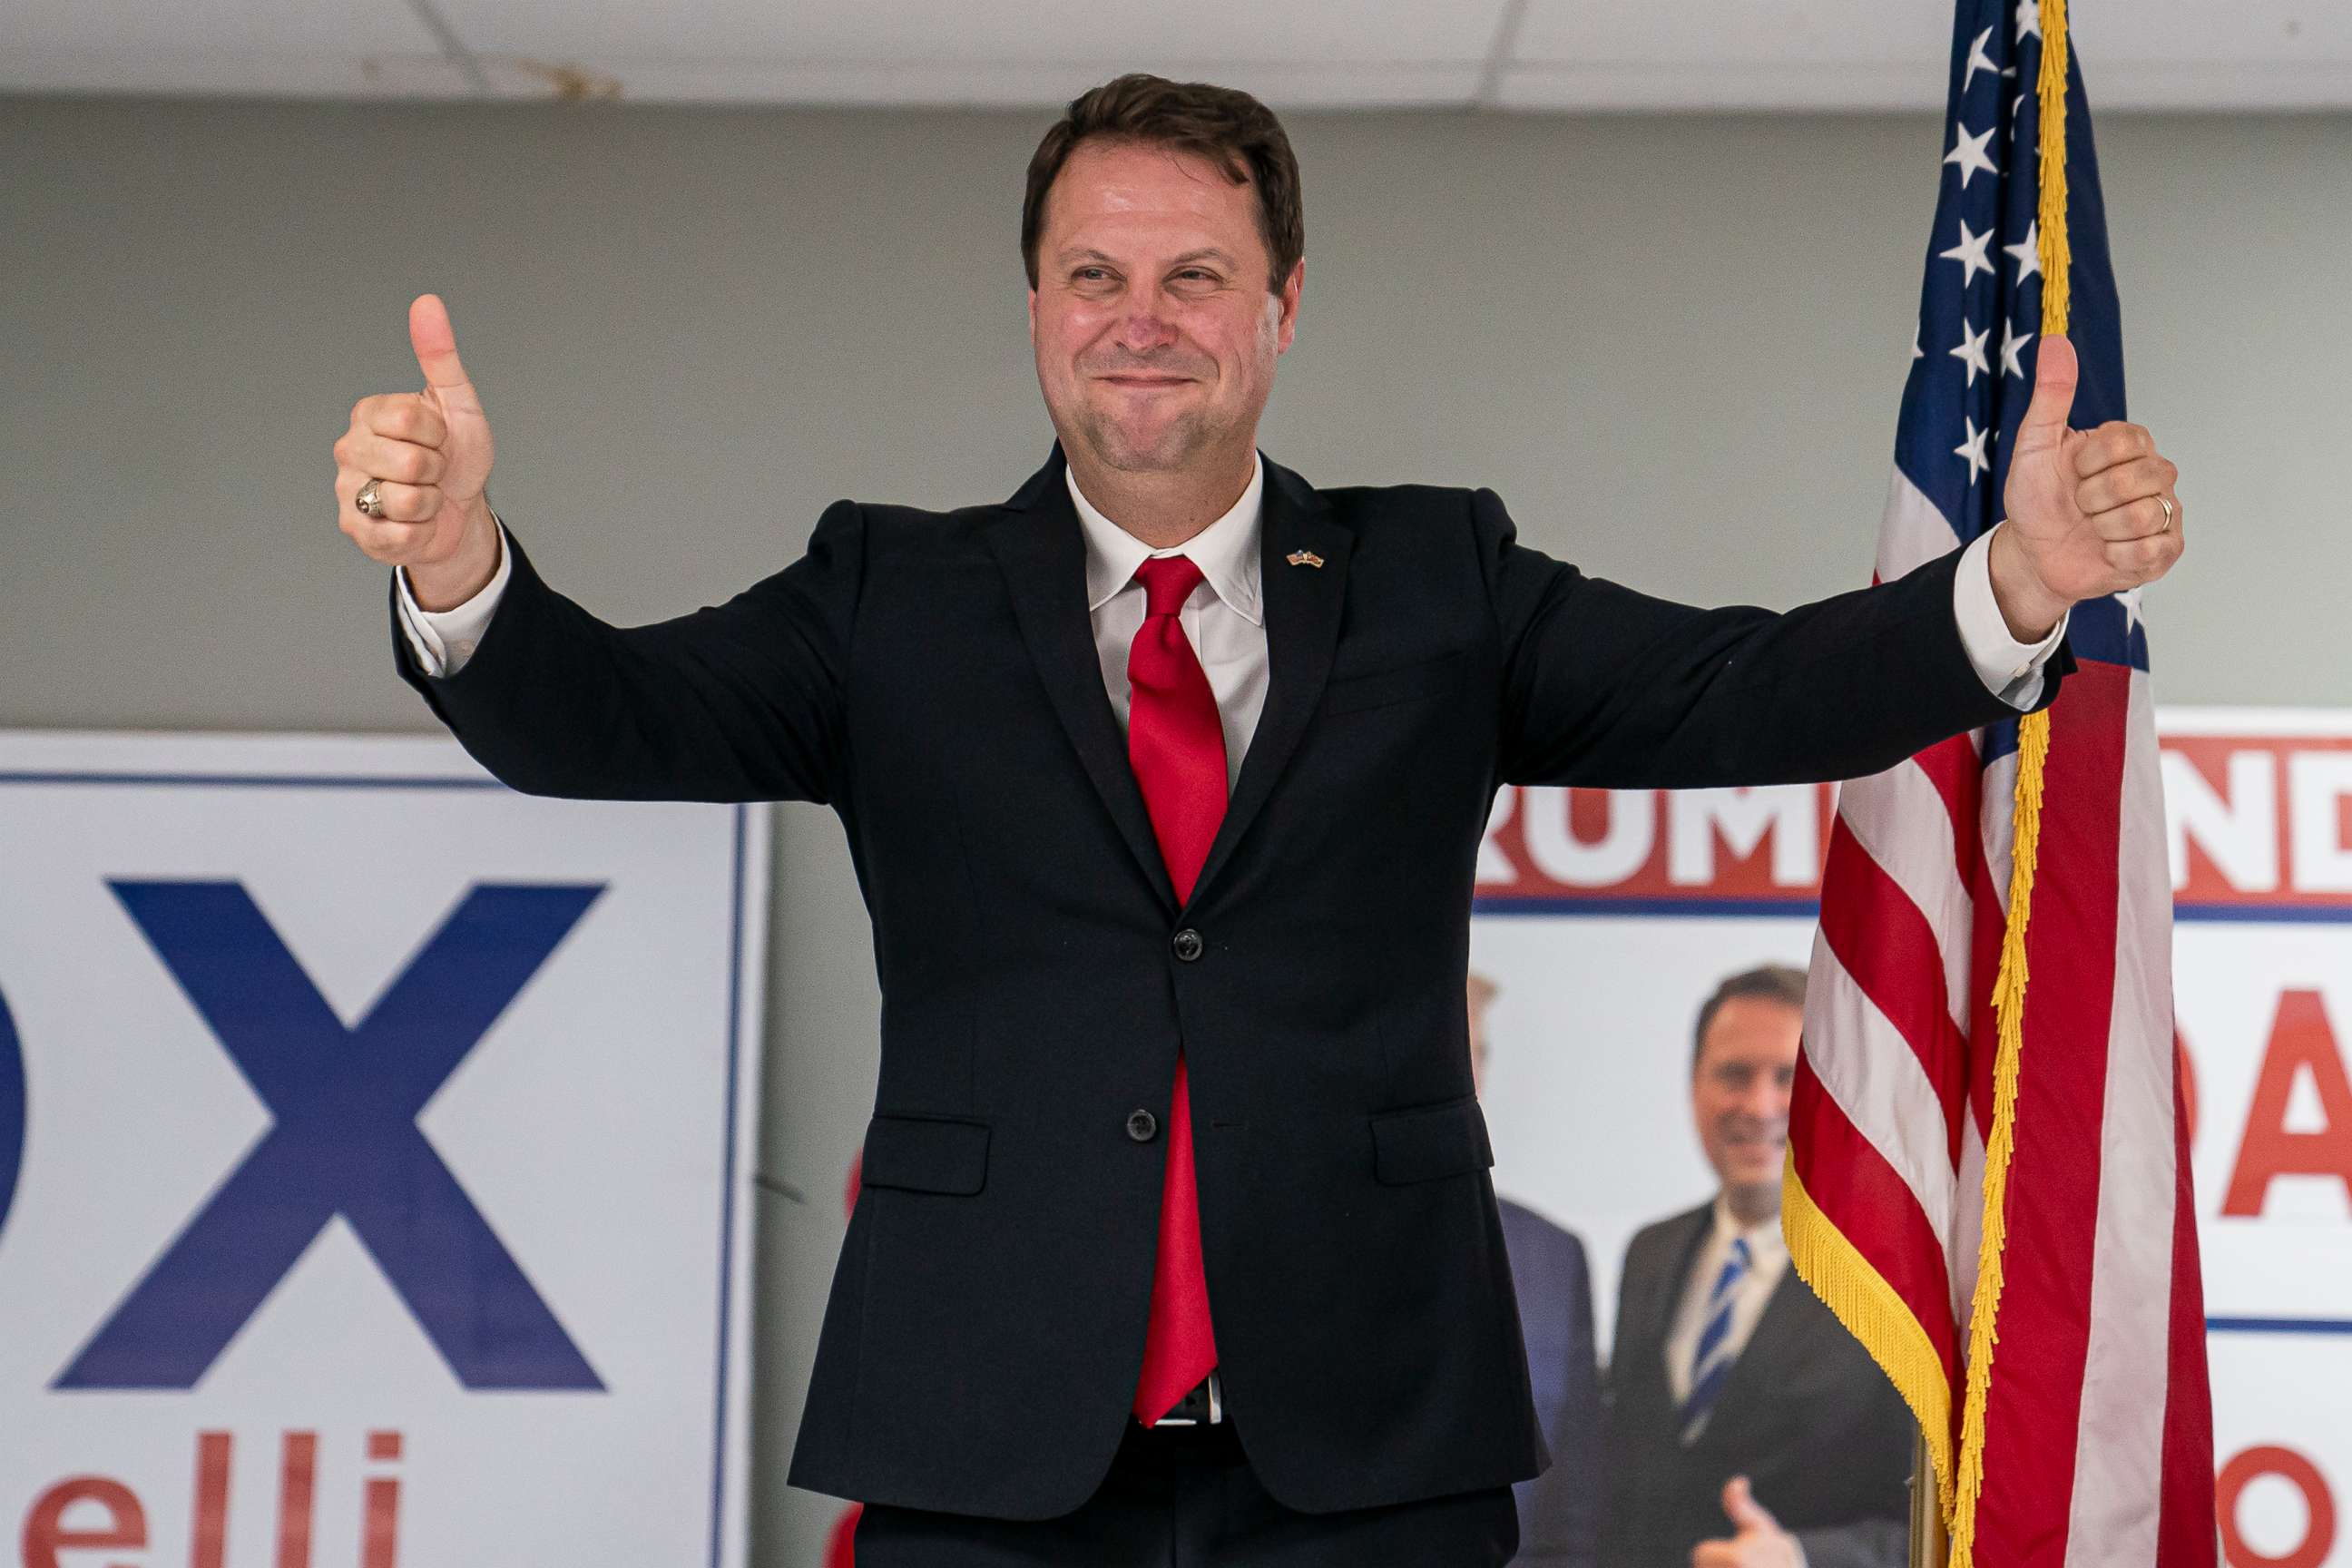 PHOTO: Dan Cox, a candidate for the Republican gubernatorial nomination, reacts to his primary win, July 19, 2022, in Emmitsburg, Md.